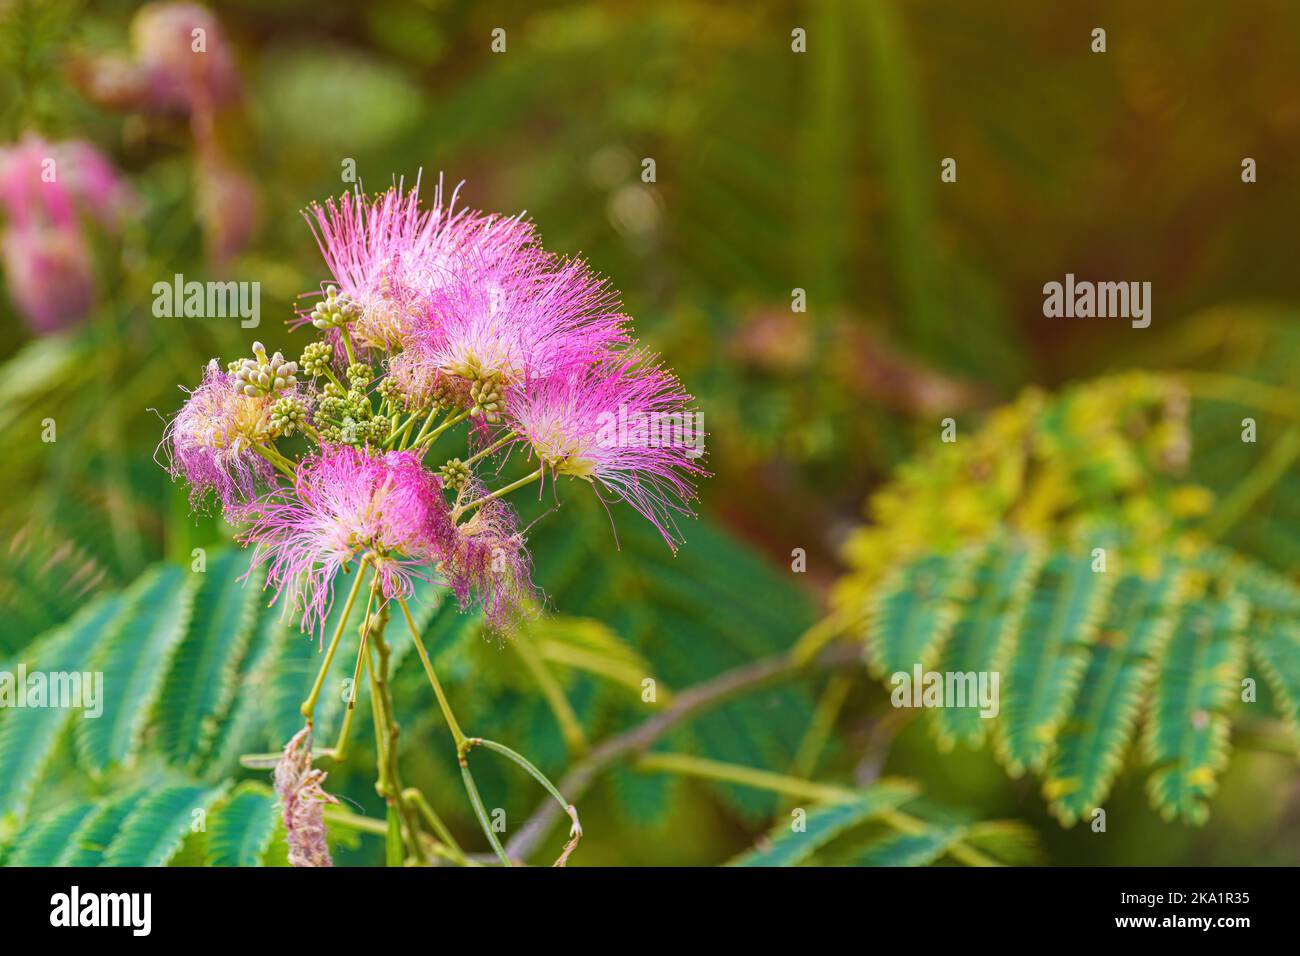 Mimosa or Persian silk tree (Albizia julibrissin) in bloom with beautiful pink flowers, selective focus Stock Photo